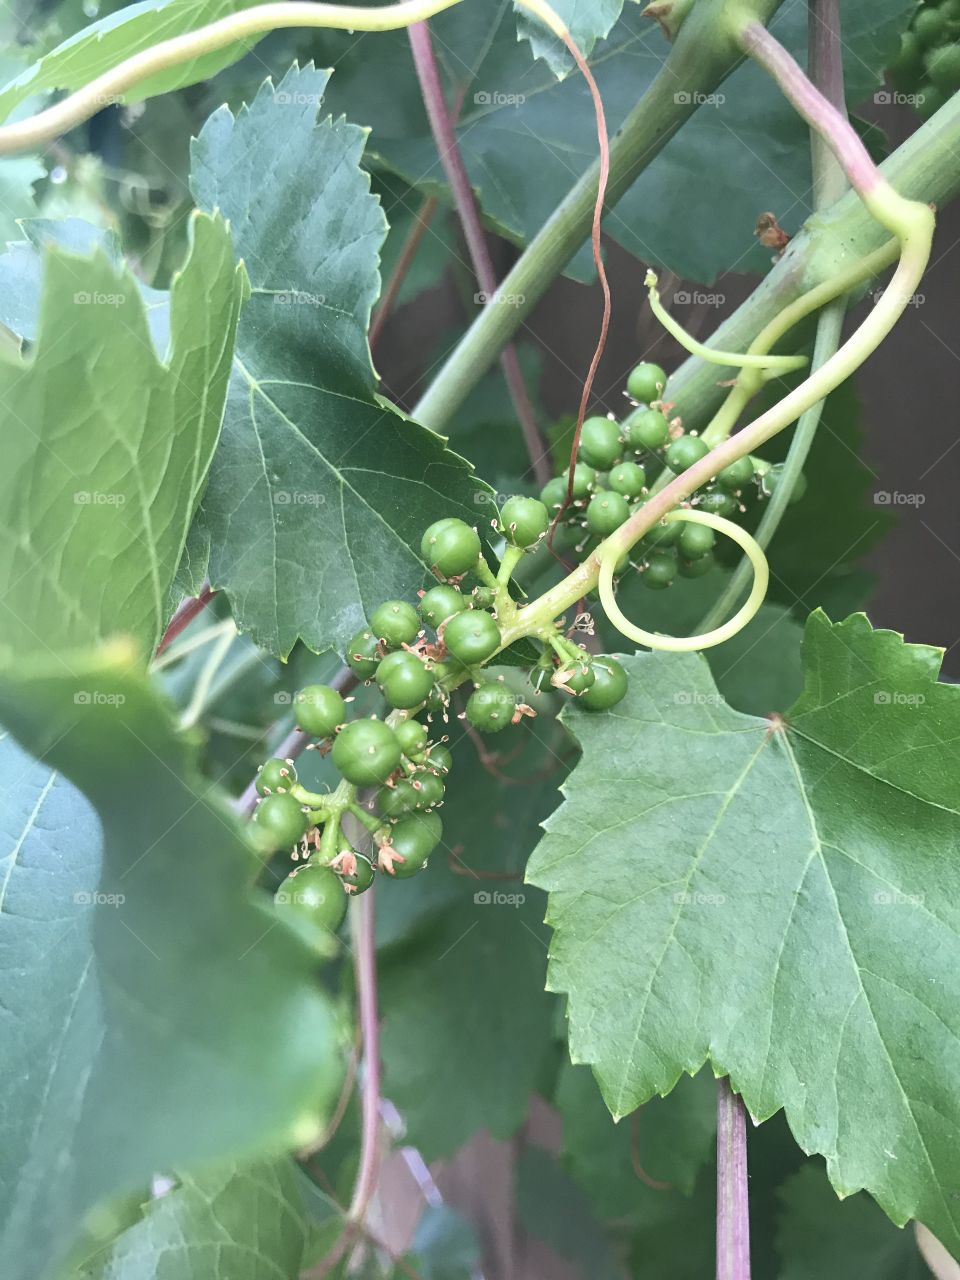 Grapes starting to grow